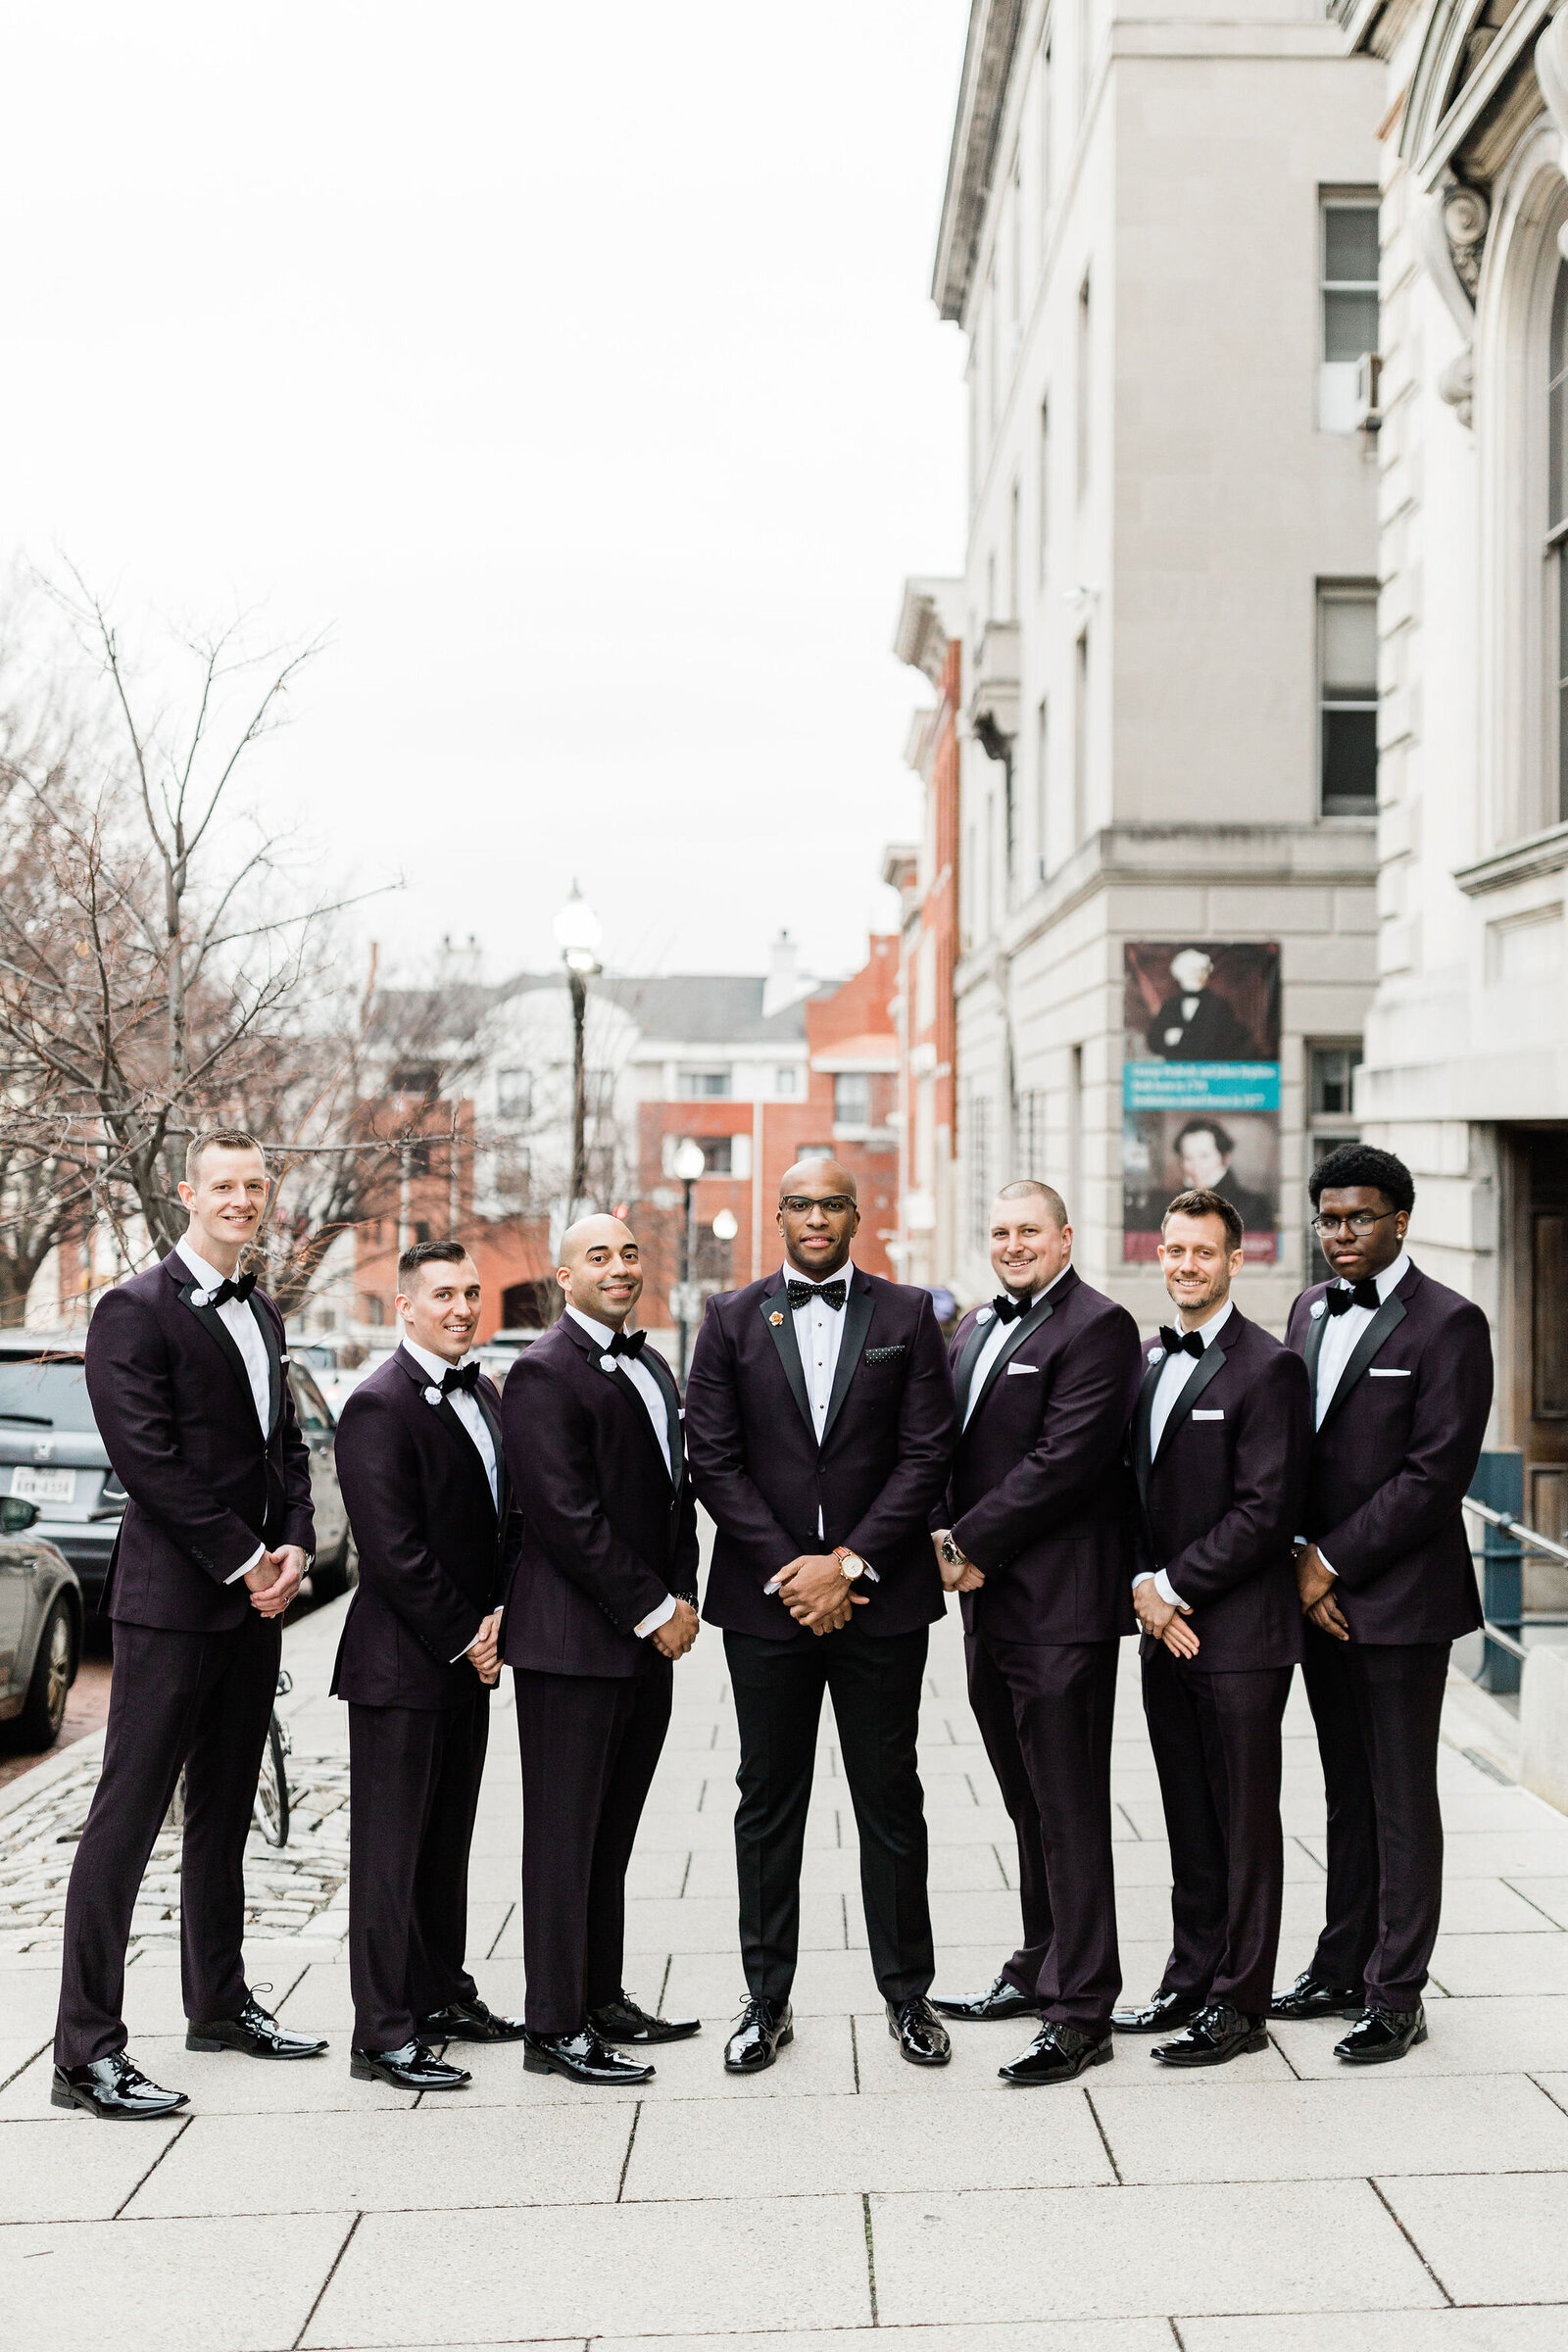 Groomsman Photos | The Peabody Library Baltimore MD | The Axtells Photo and Film